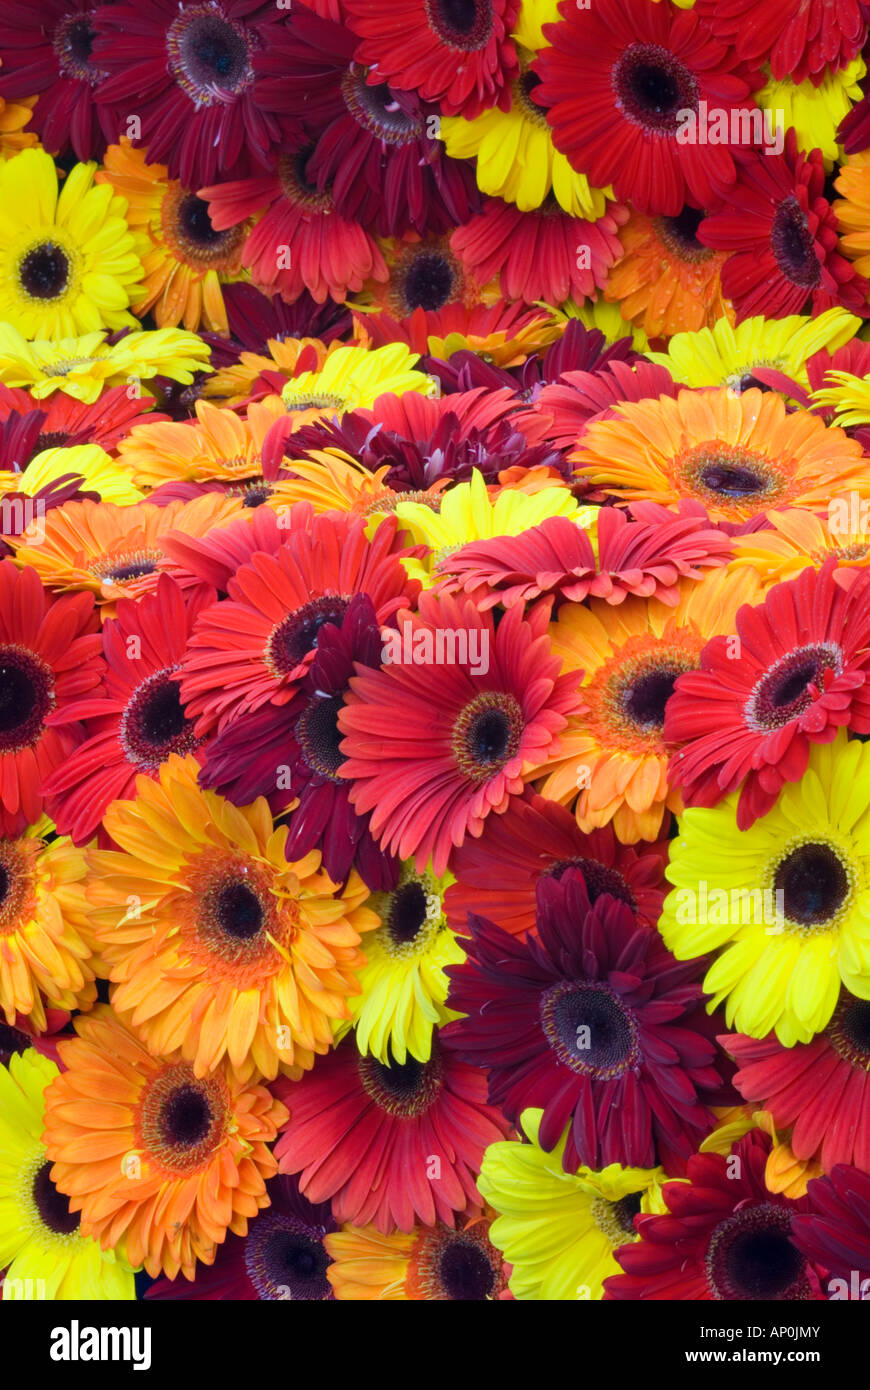 Gerberas (South African Daisies, Transvaal daisy) Stock Photo